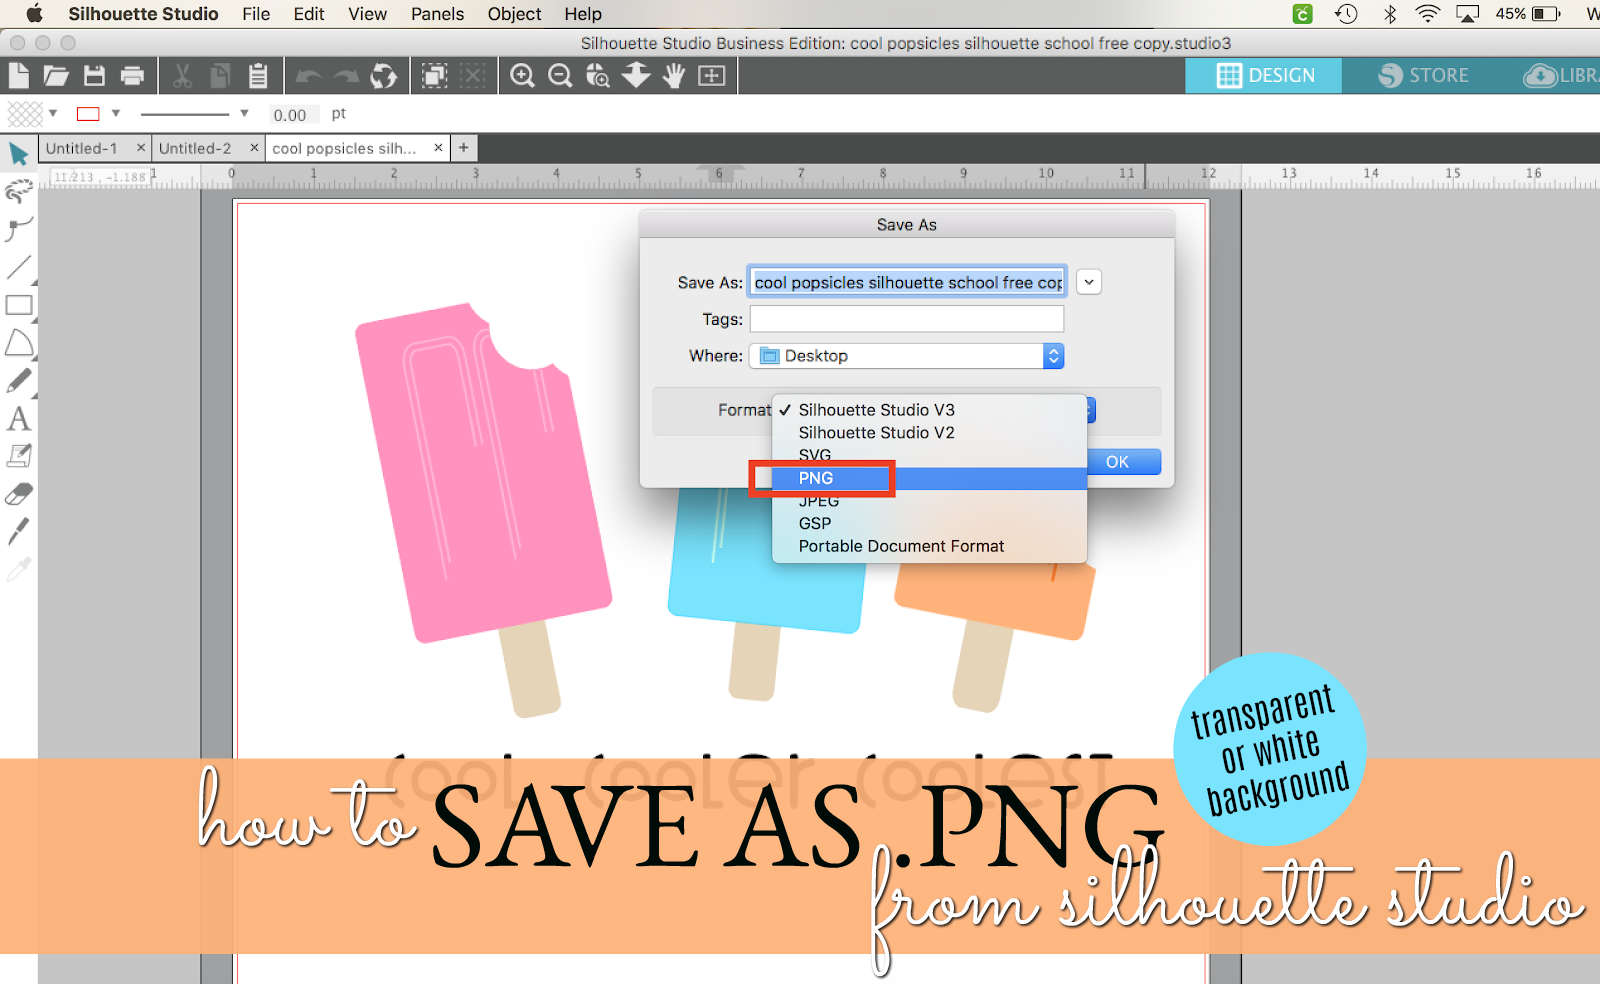 How to Save as PNG from Silhouette Studio (V4.2 Series.